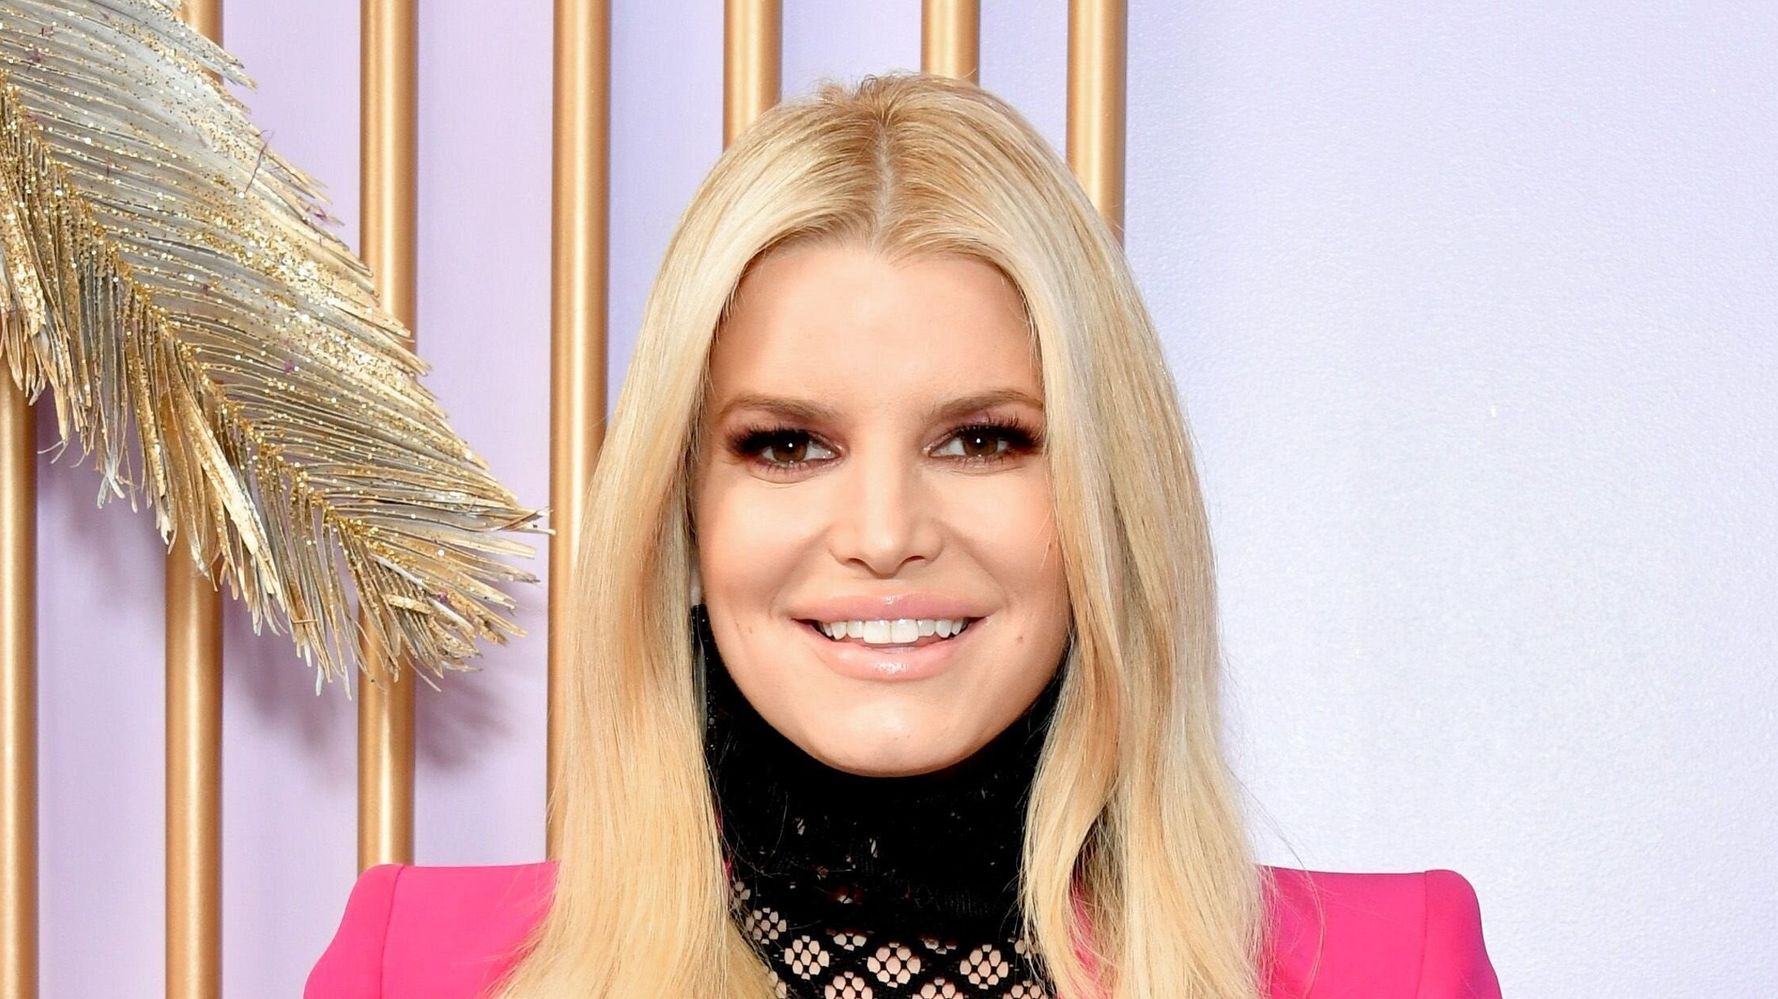 Jessica Simpson Shares ‘Unrecognizable’ Photo To Honor 4 Years Of Sobriety